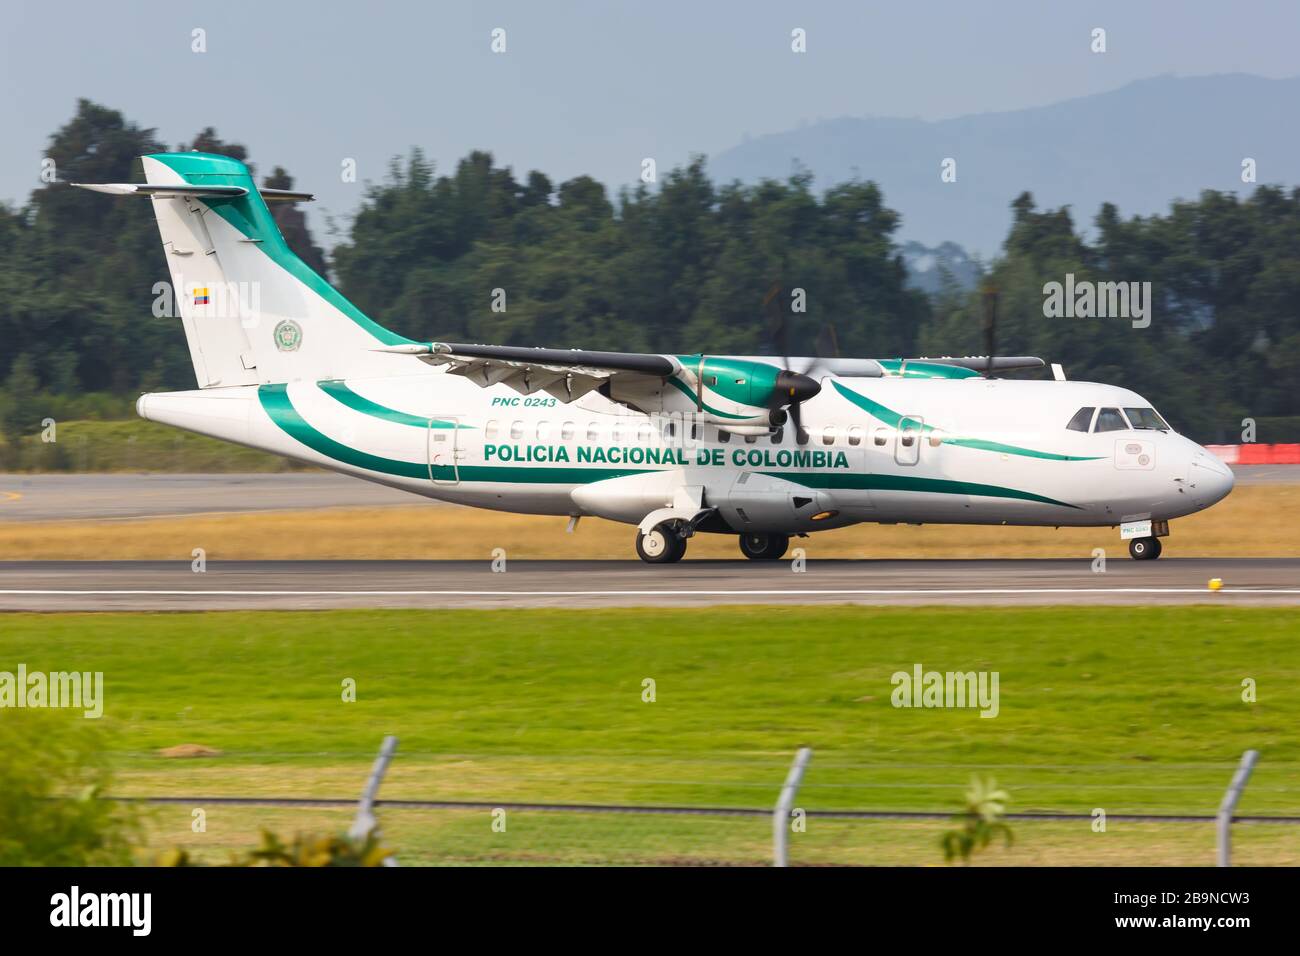 Bogota, Colombia – January 30, 2019: Policia Nacional de Colombia PNC ATR 42 airplane at Bogota airport (BOG) in Colombia. Stock Photo